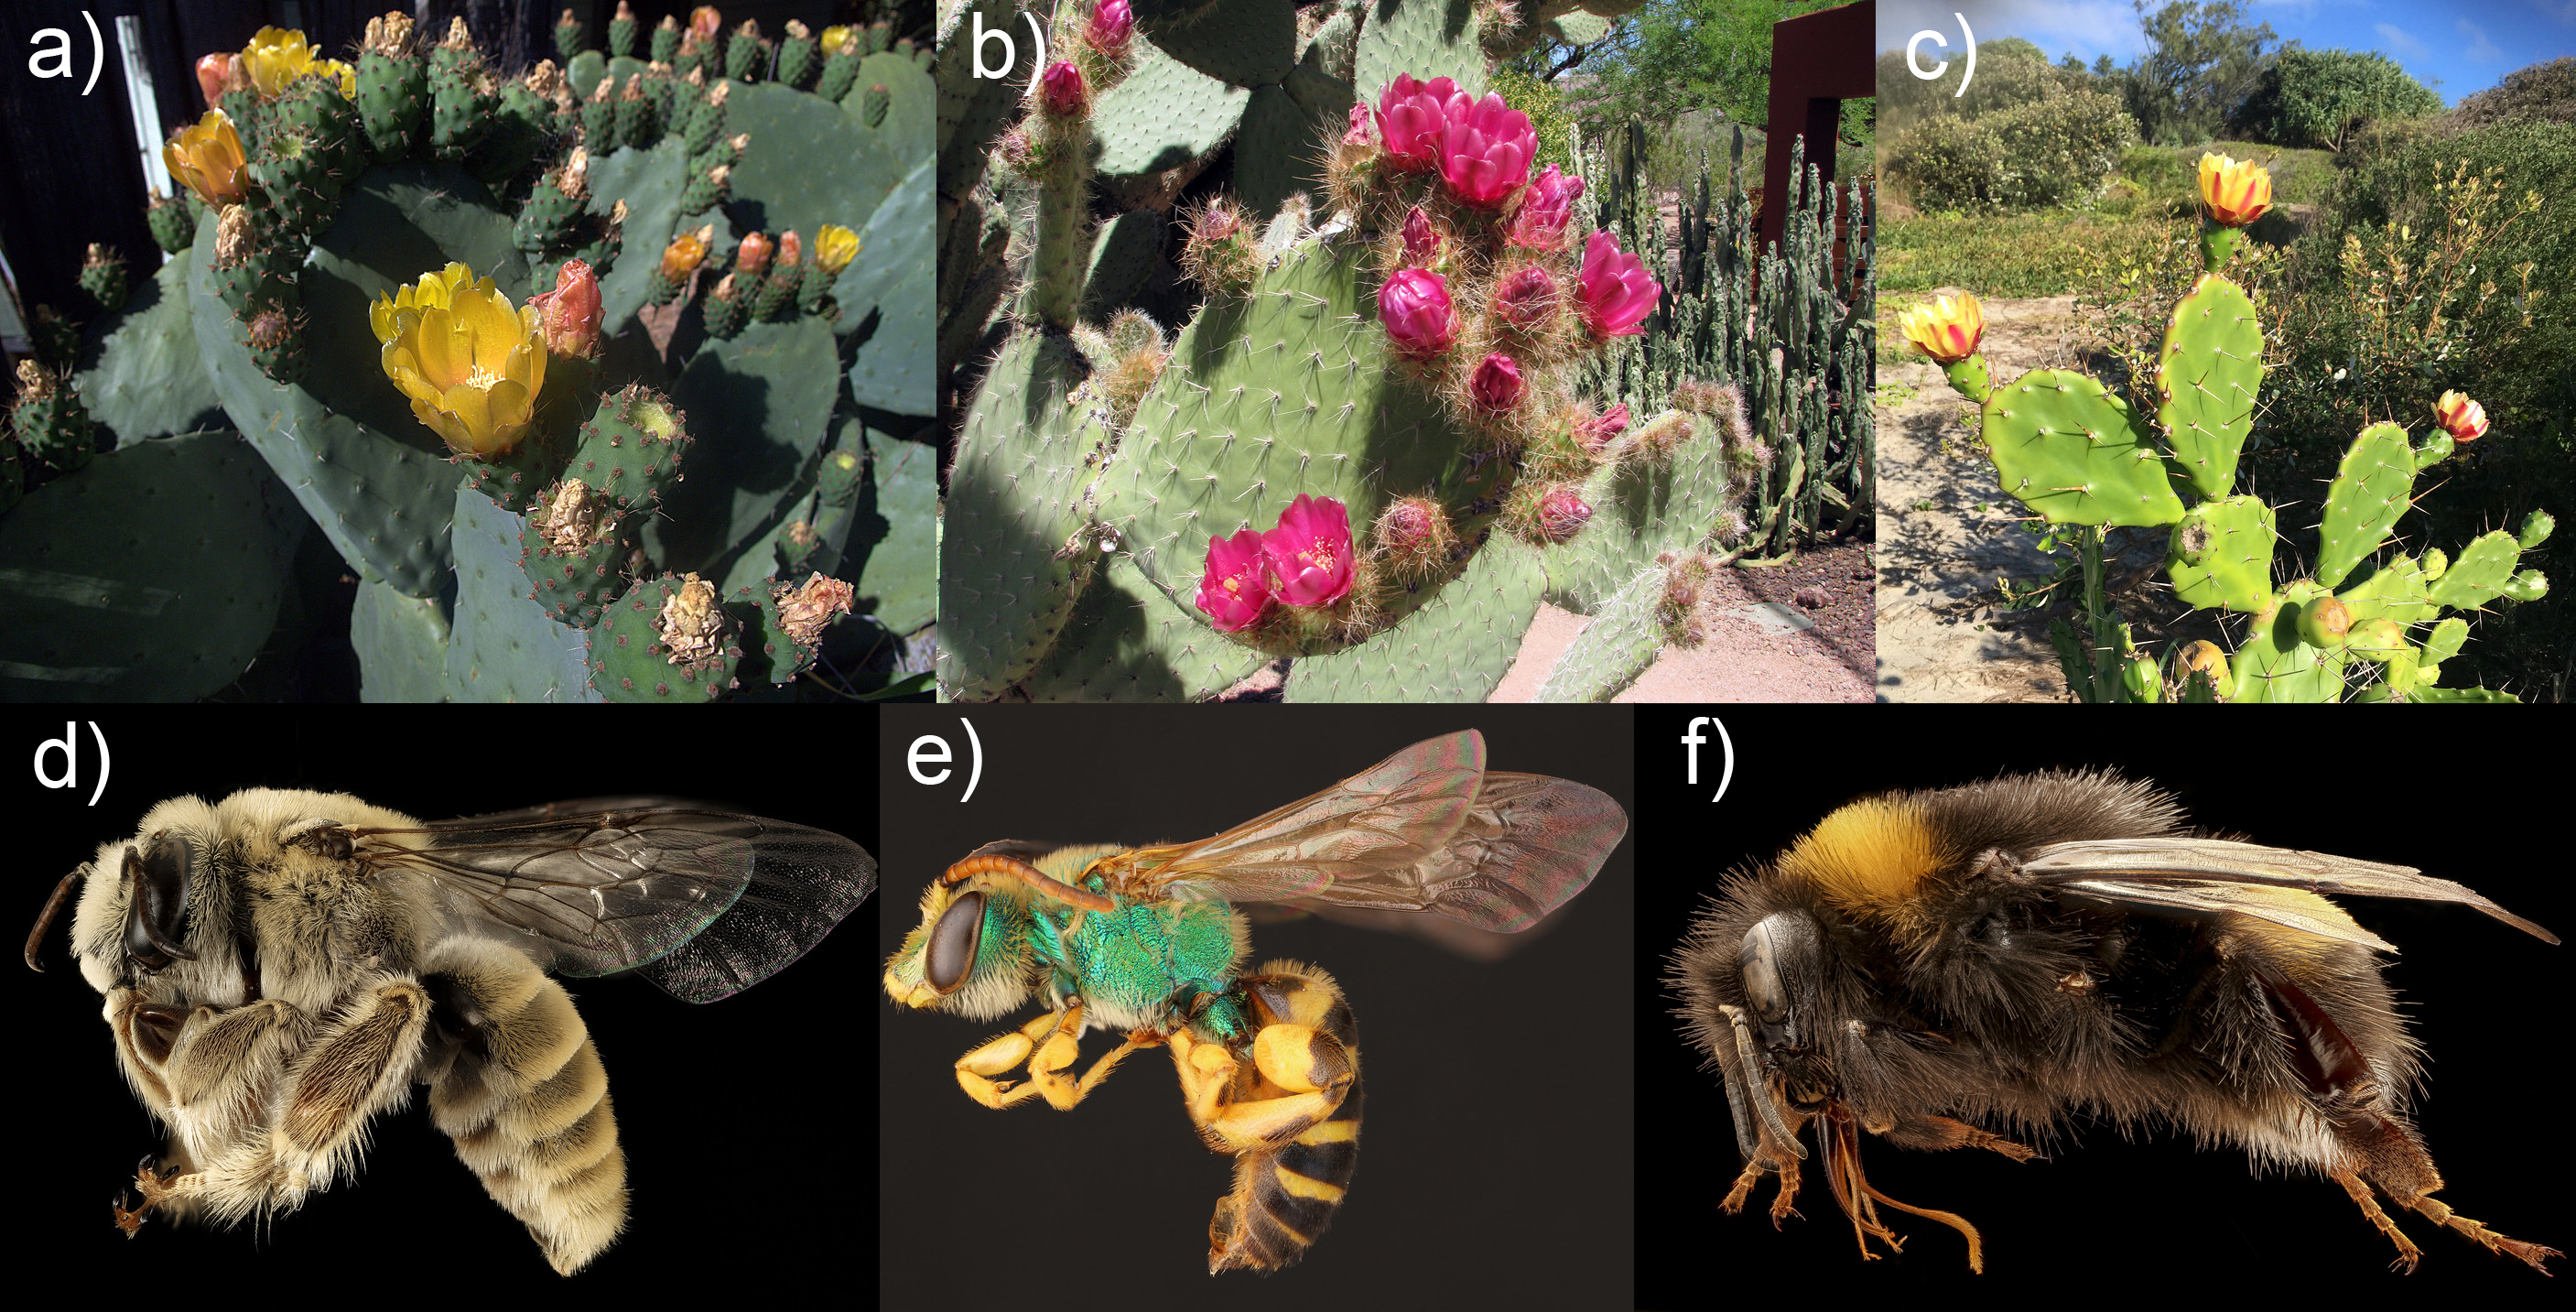 Figure 2. Examples of species that constituted part of the core in both global and Mexico networks. Upper figures show the flowering Opuntia species (a) O. ficus-indica, (b) O. pilifera, and (c) O. monacantha and lower figures show core bees (d) Diadasia rinconis, (e) Agapostemon texanus, and (f) Bombus terrestris. Note that the photos are not scaled.